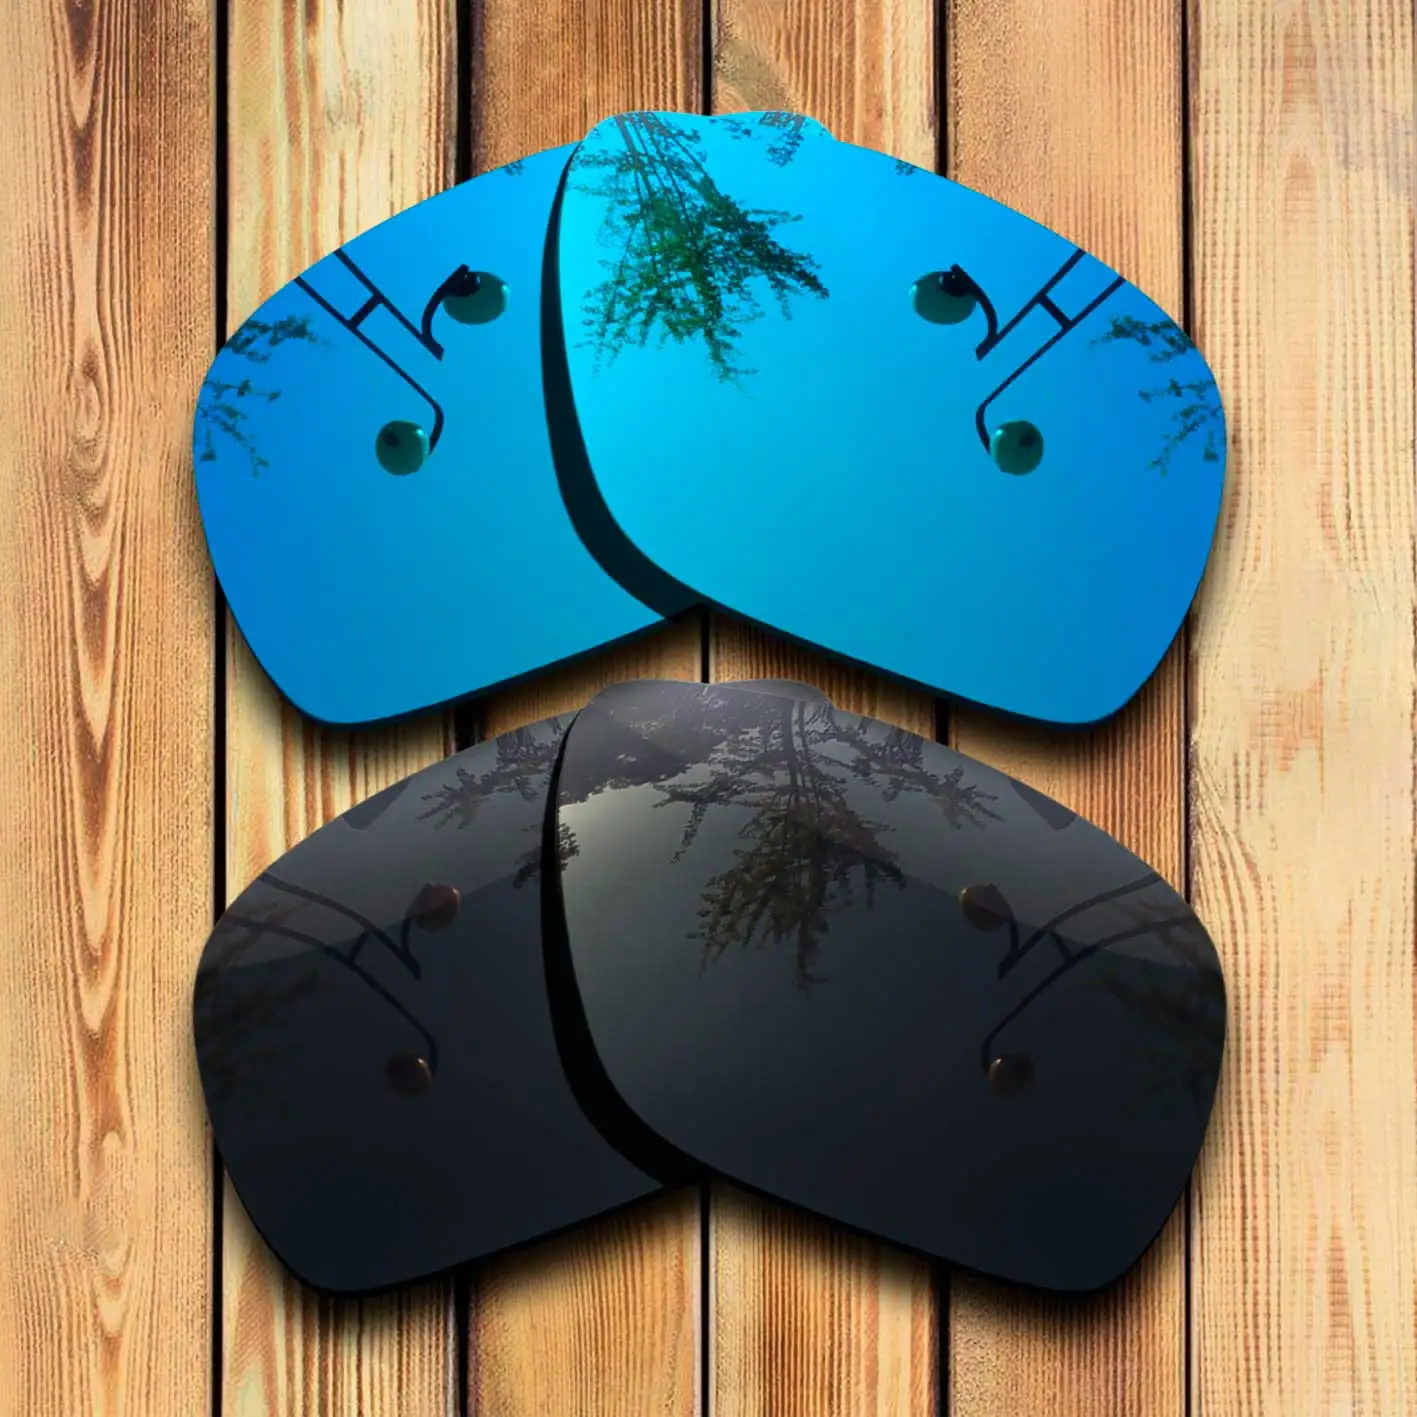 100% Precisely Cut Polarized Replacement Lenses for DISPATCH 1 Sunglasses  Blue& Solid Black Combine Options